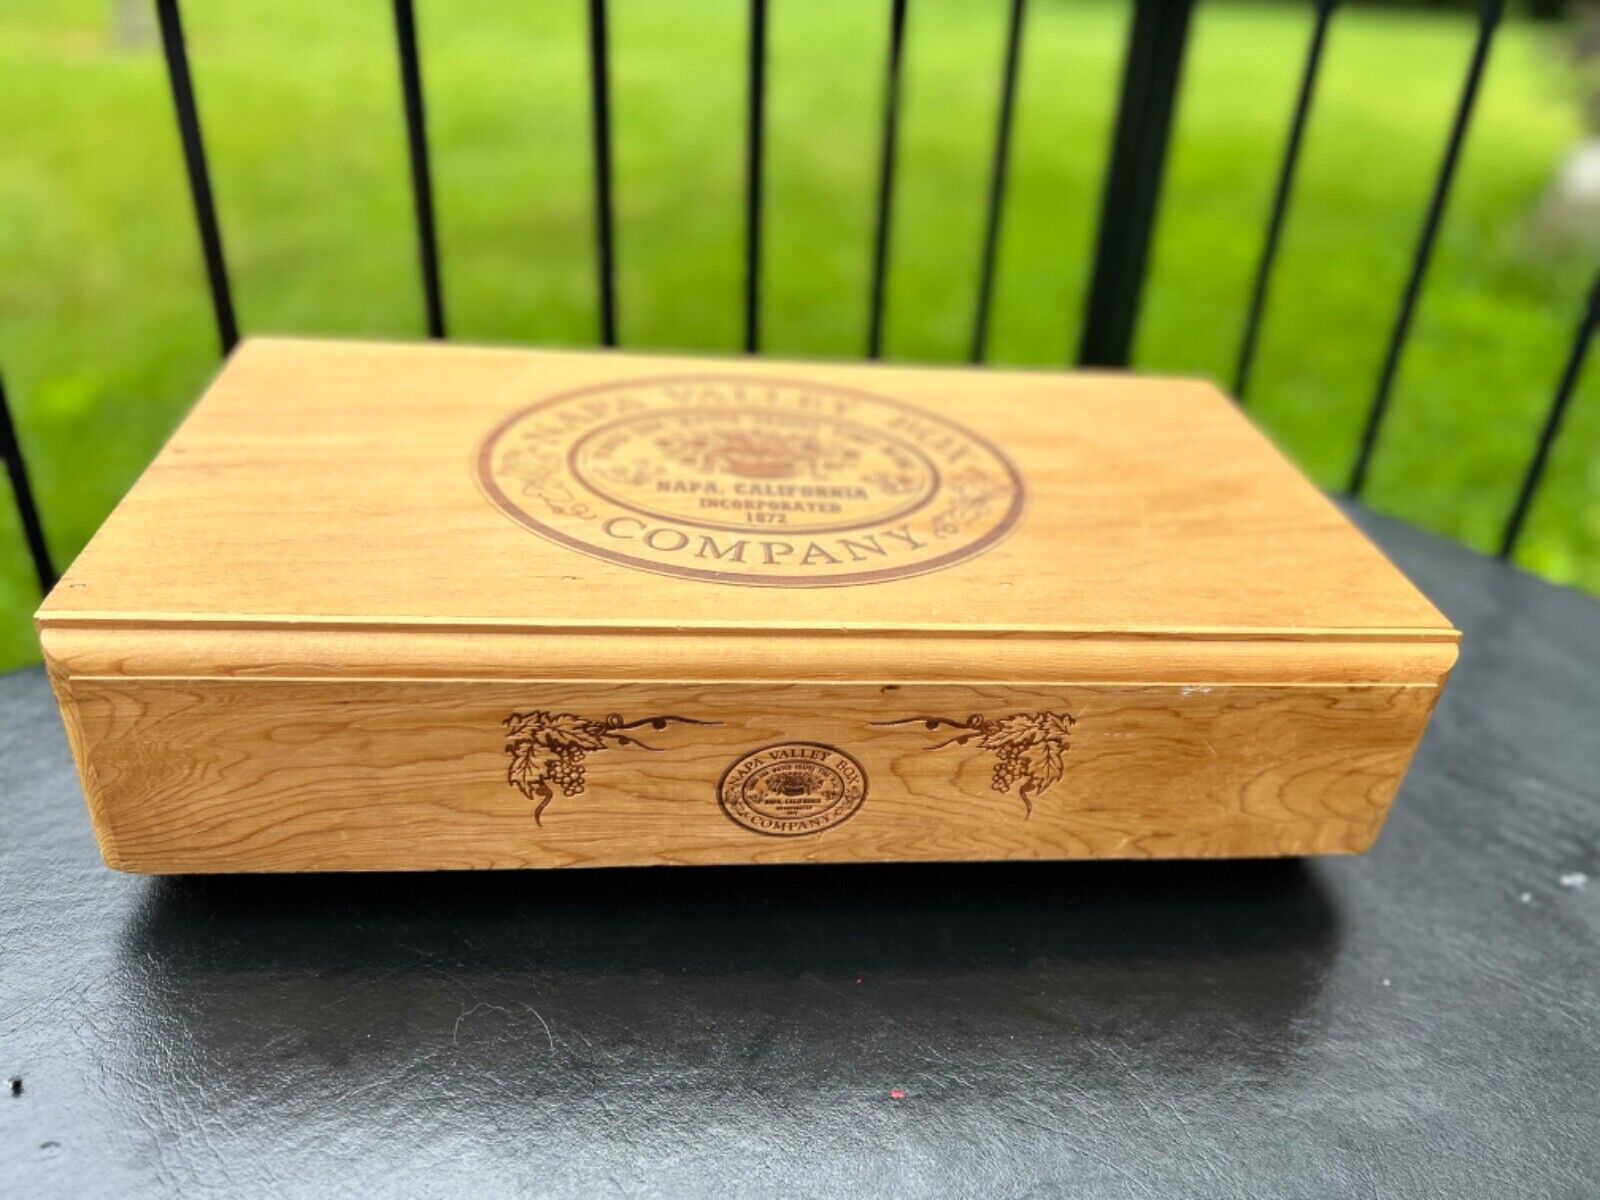 VTG Napa Valley California Wood Crate Box w Bin Drawers Cassette Case Stickers